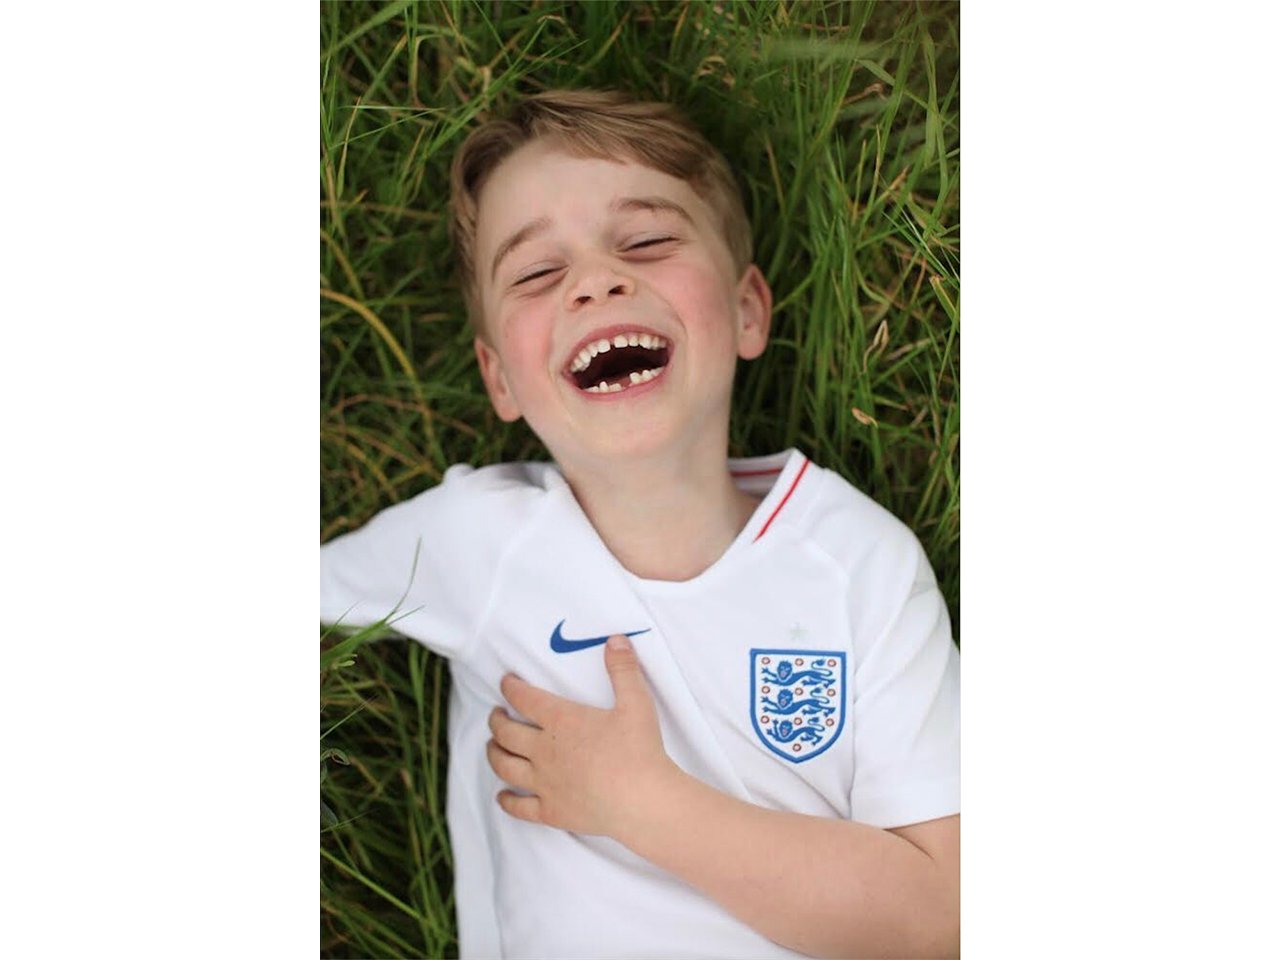 Prince George laughing in the grass in a soccer shirt